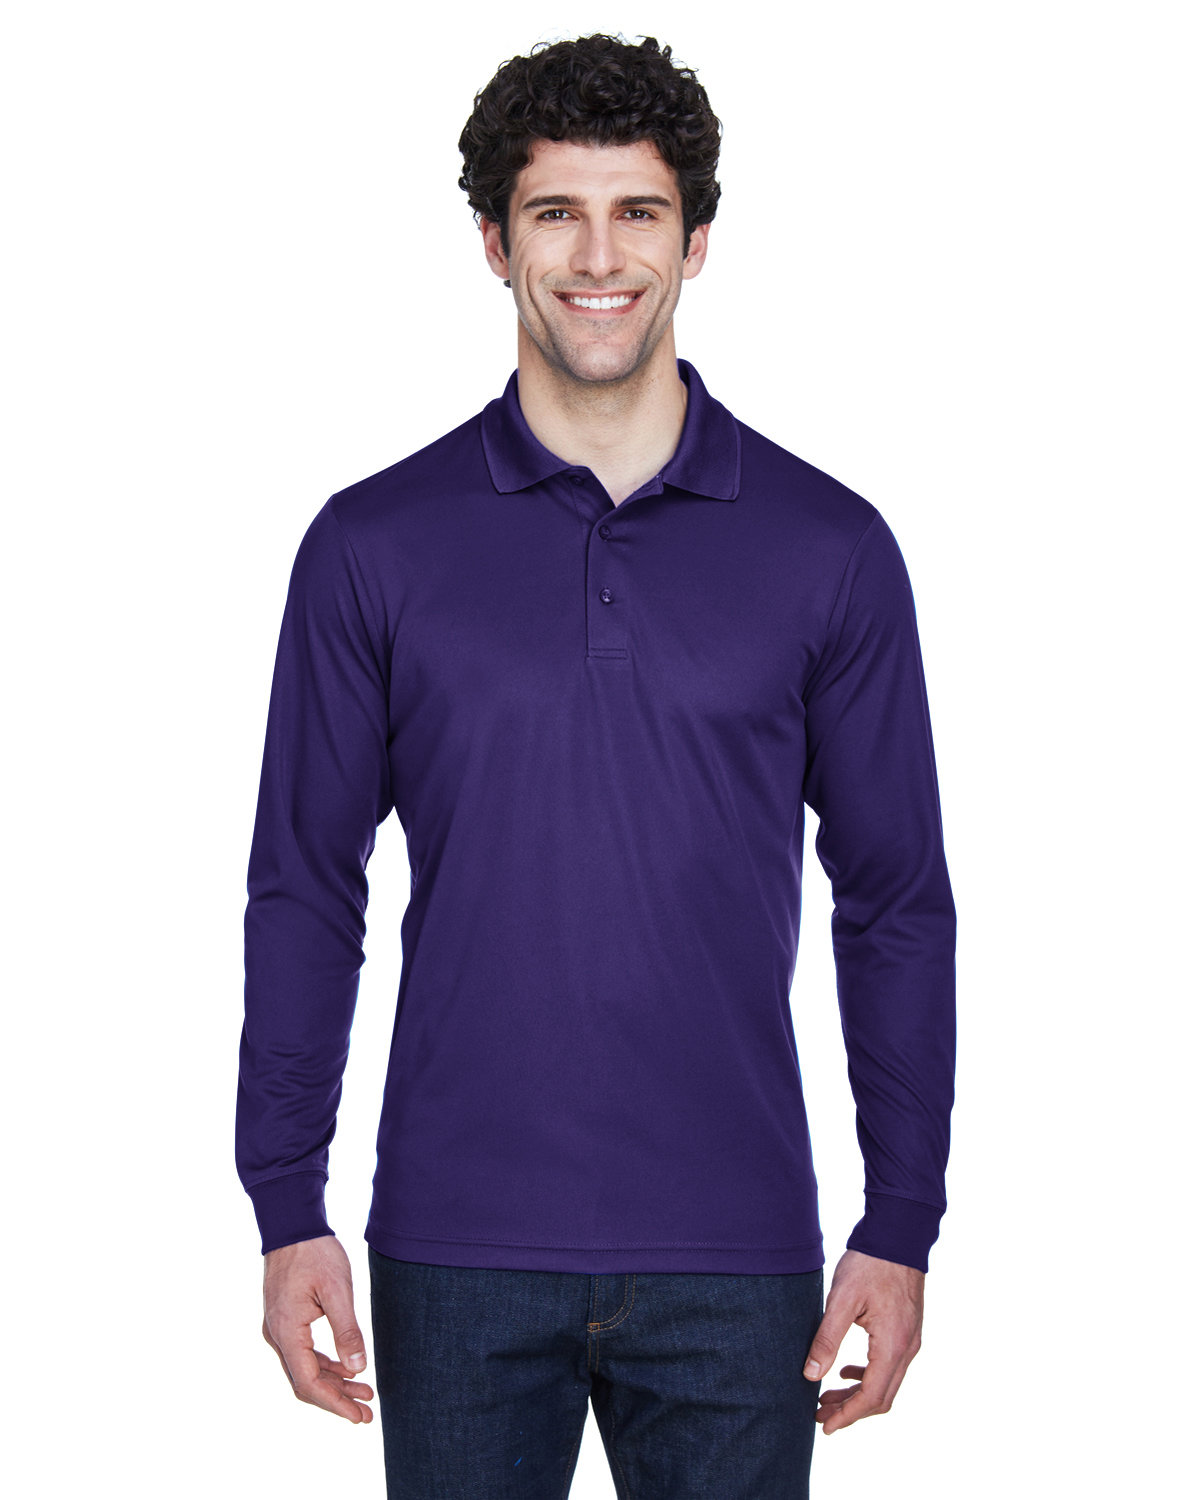 Front view of Men’s Pinnacle Performance Long-Sleeve Piqué Polo